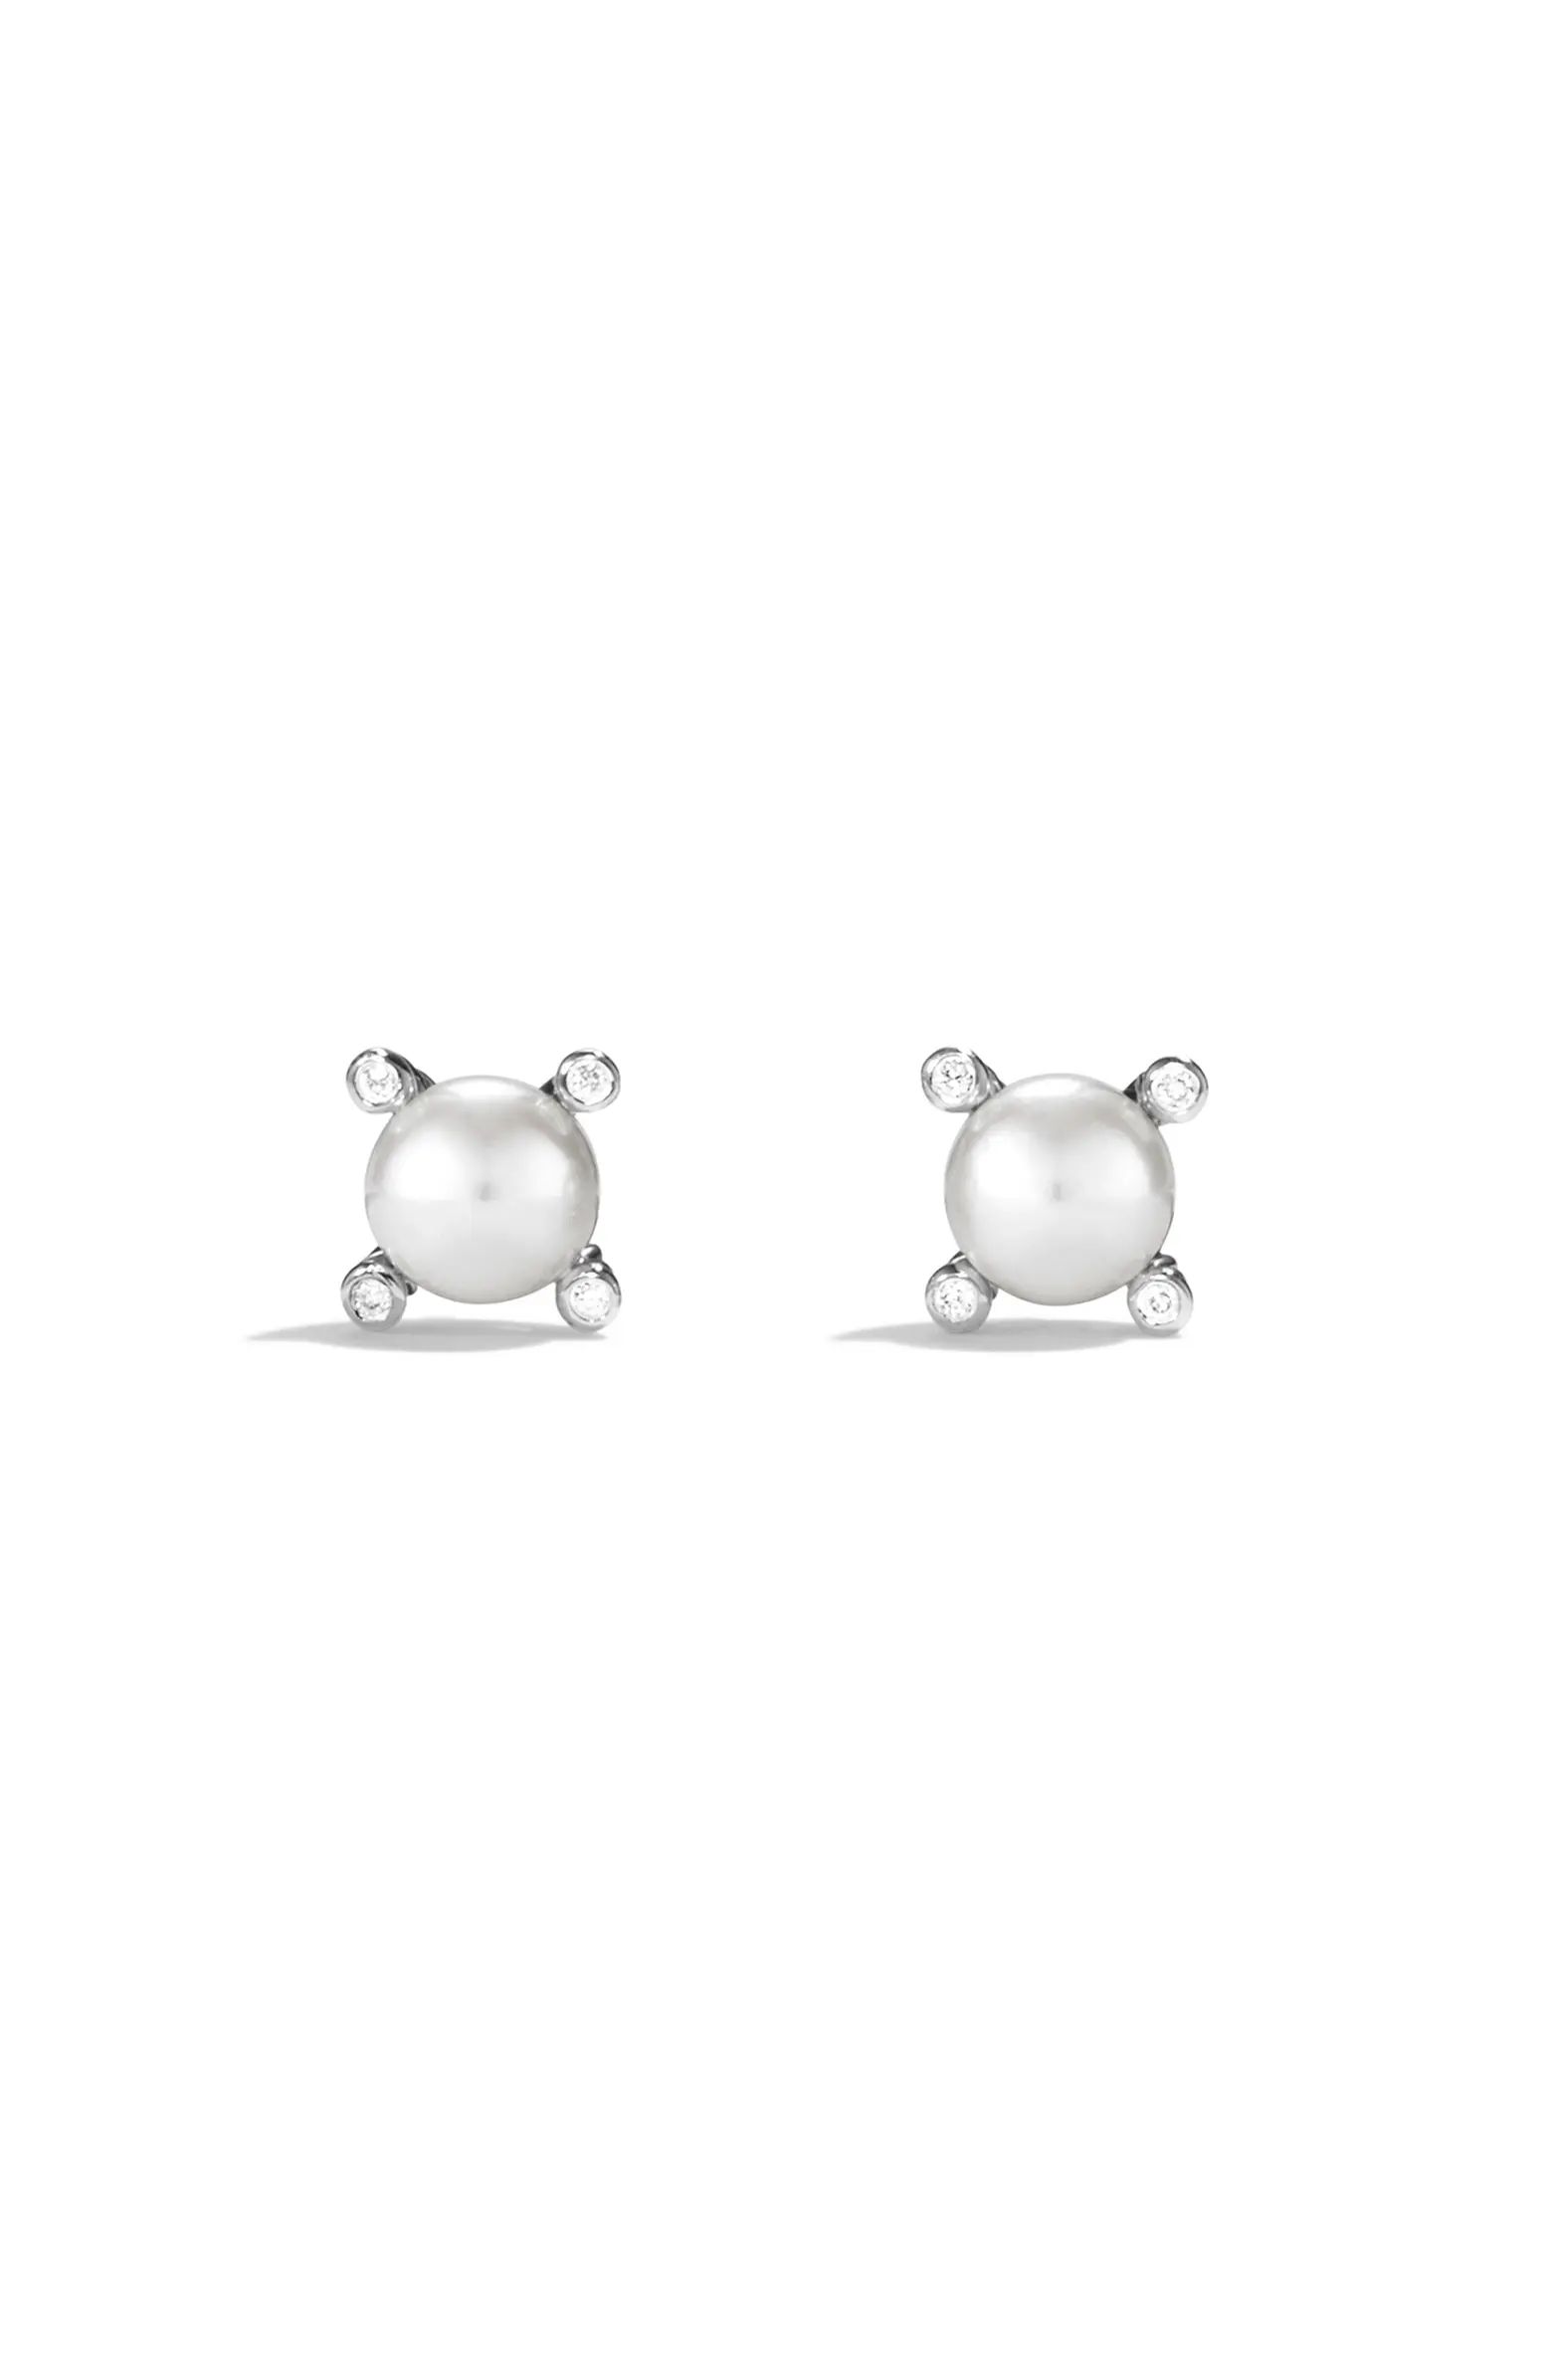 Small Pearl Earrings with Diamonds | Nordstrom